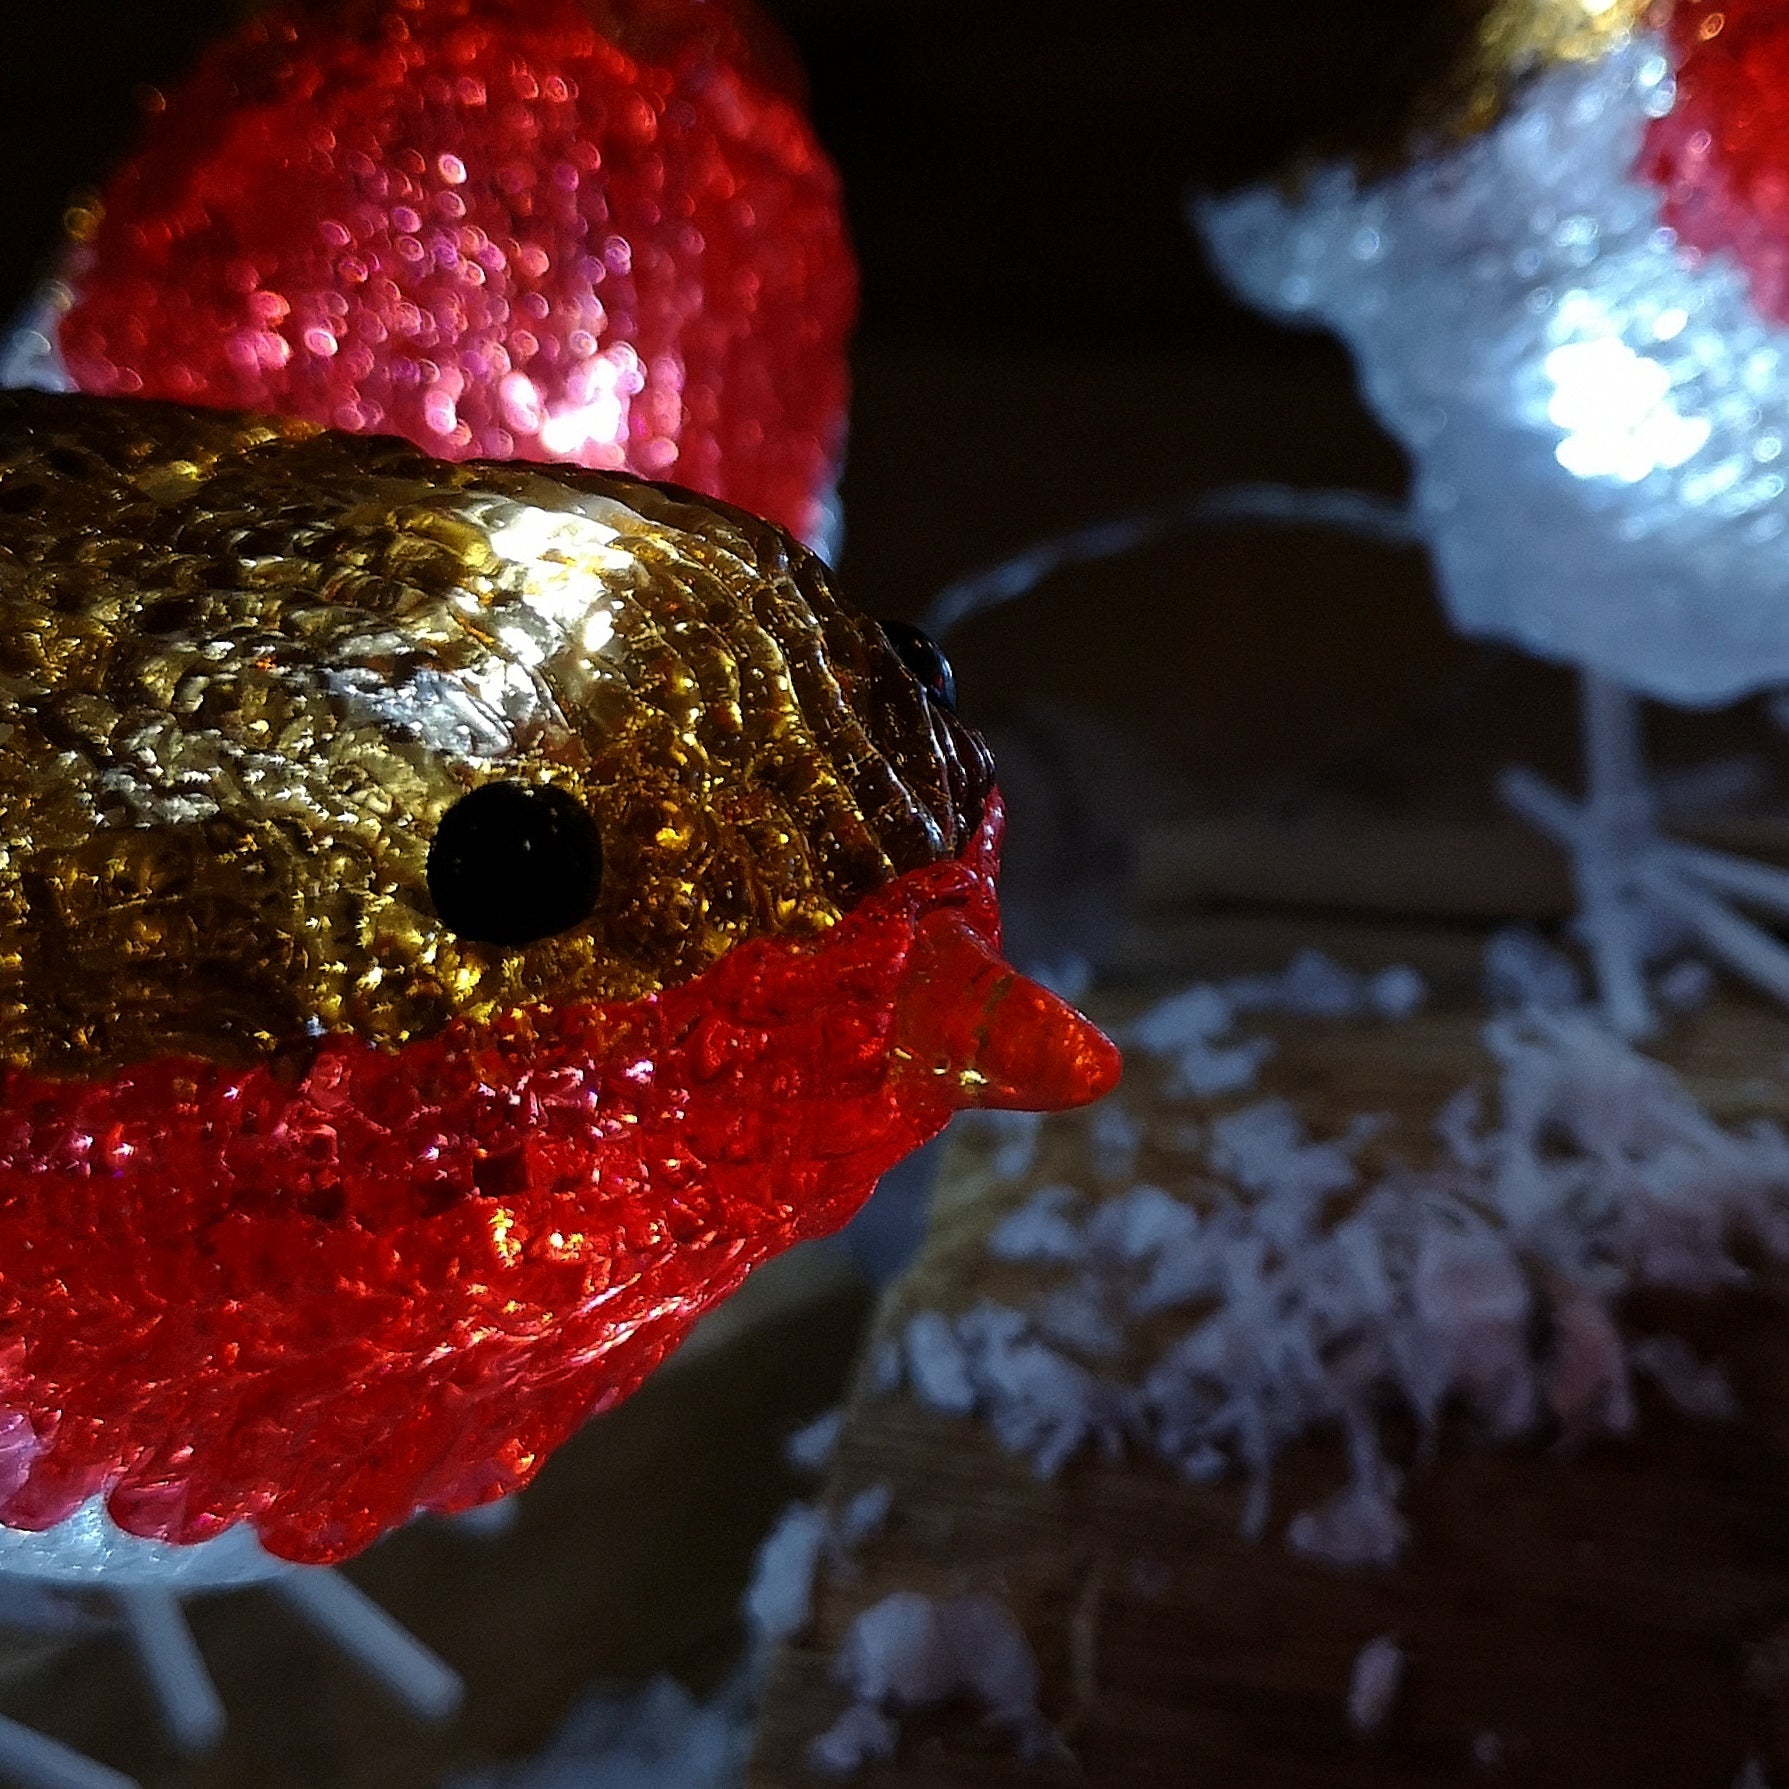 Set of 5 Christmas Acrylic Festive Light Up Robins 10cm Tall Indoor or Outdoor use